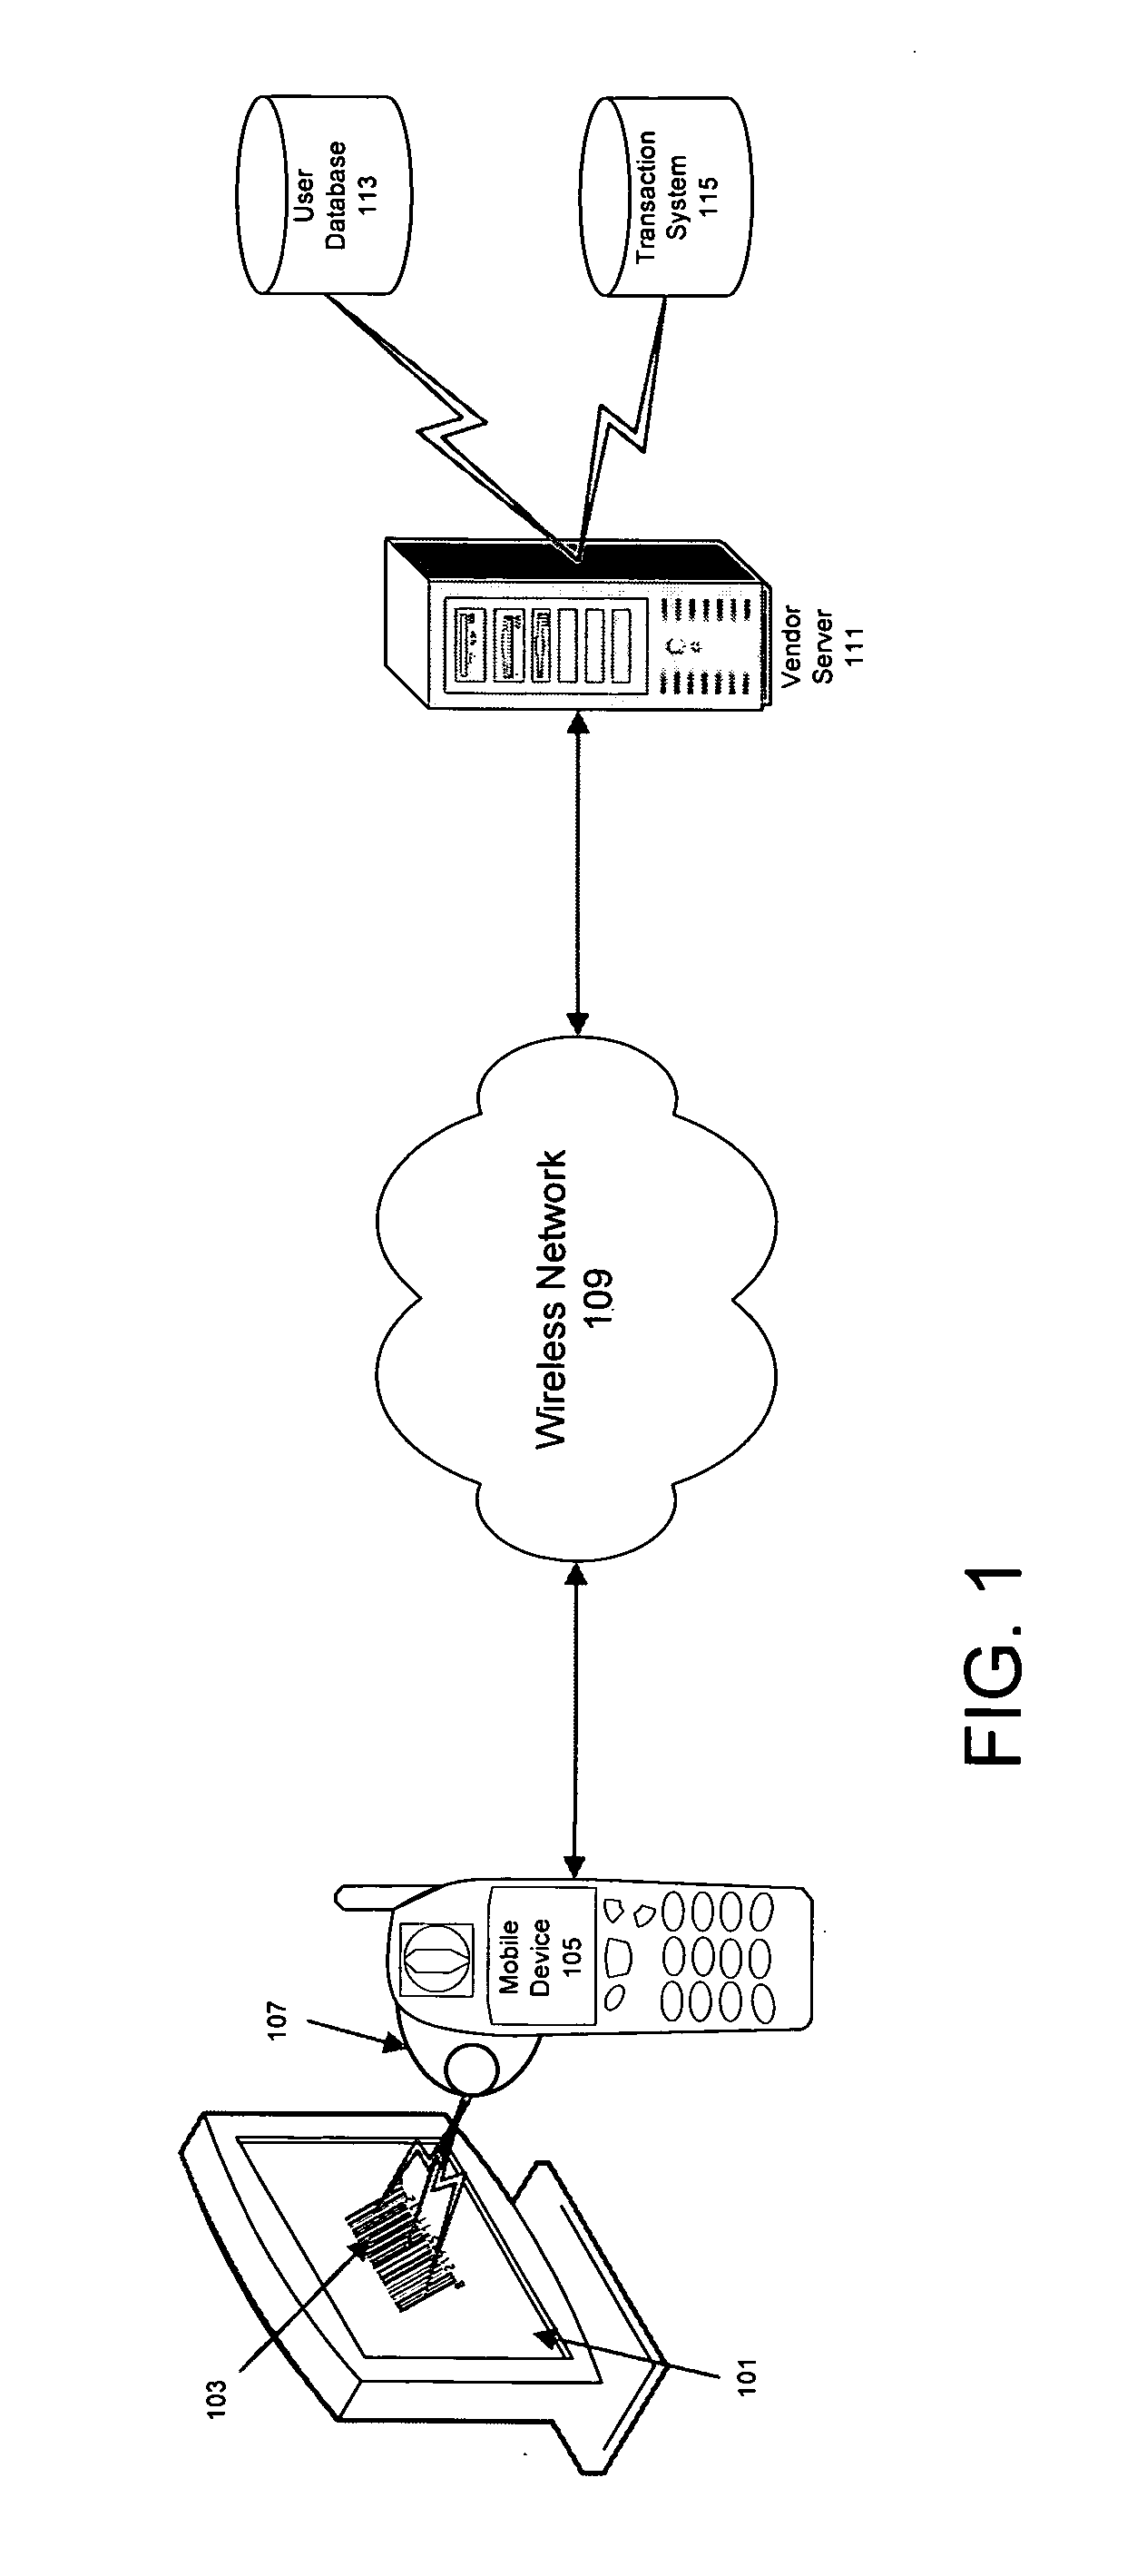 System and method for on the spot purchasing by scanning barcodes from screens with a mobile device